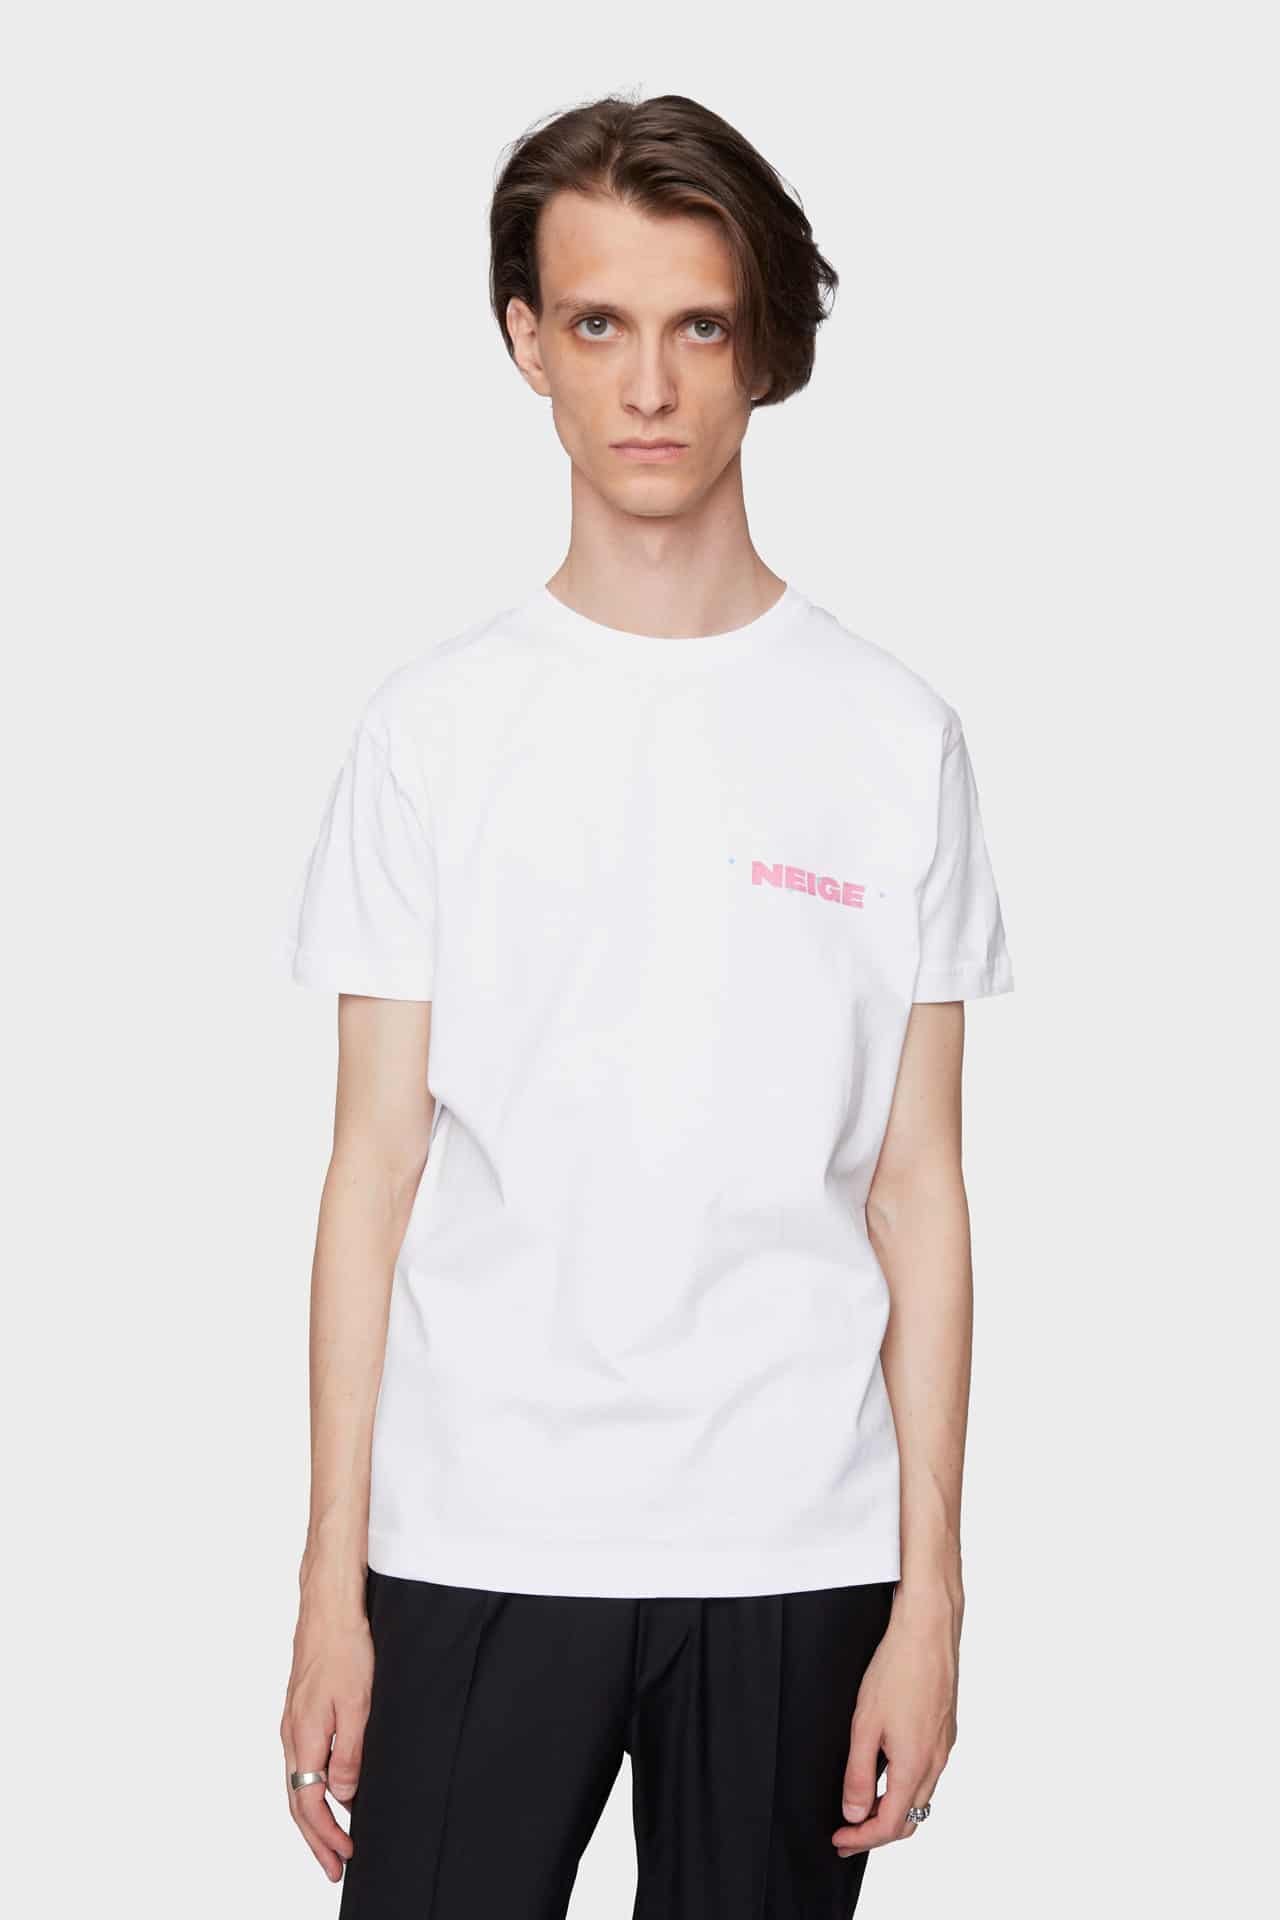 Dimensions Tee White Neige Spring / Summer 22